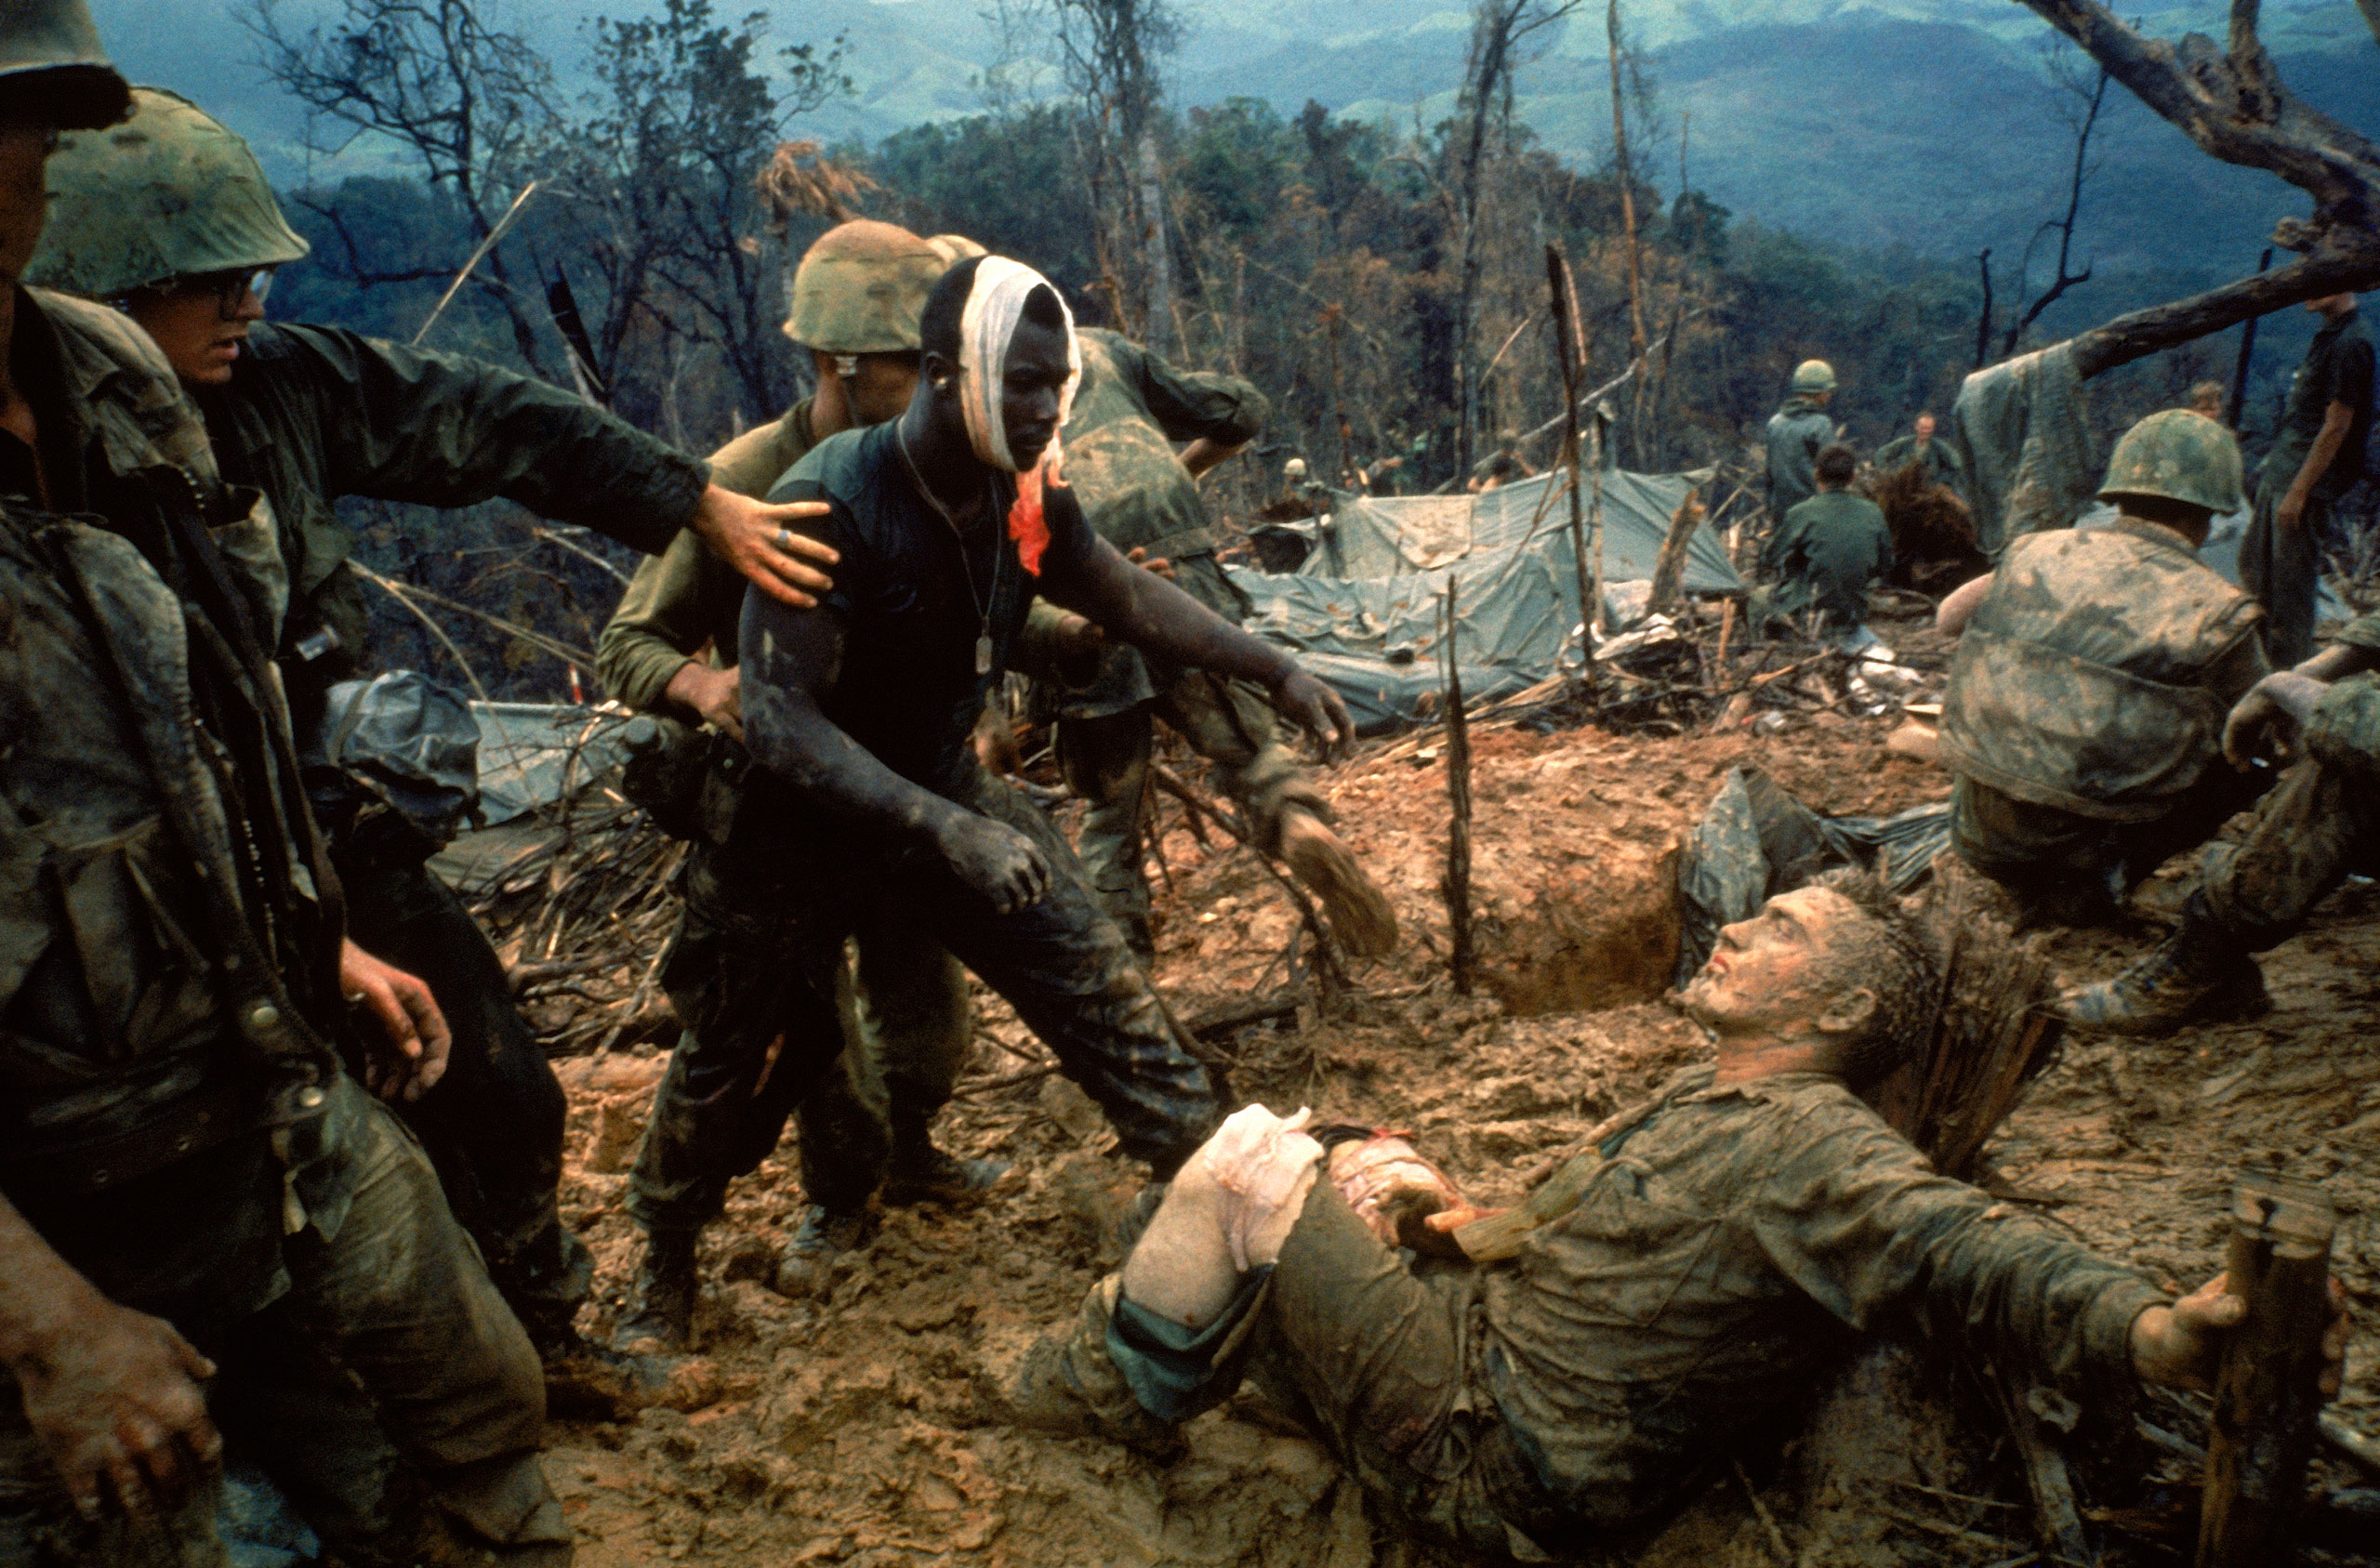 Wounded Marine Gunnery Sgt. Jeremiah Purdie (center, with bandaged head) reaches toward a stricken comrade after a fierce firefight south of the DMZ in Vietnam in Oct. 1966.